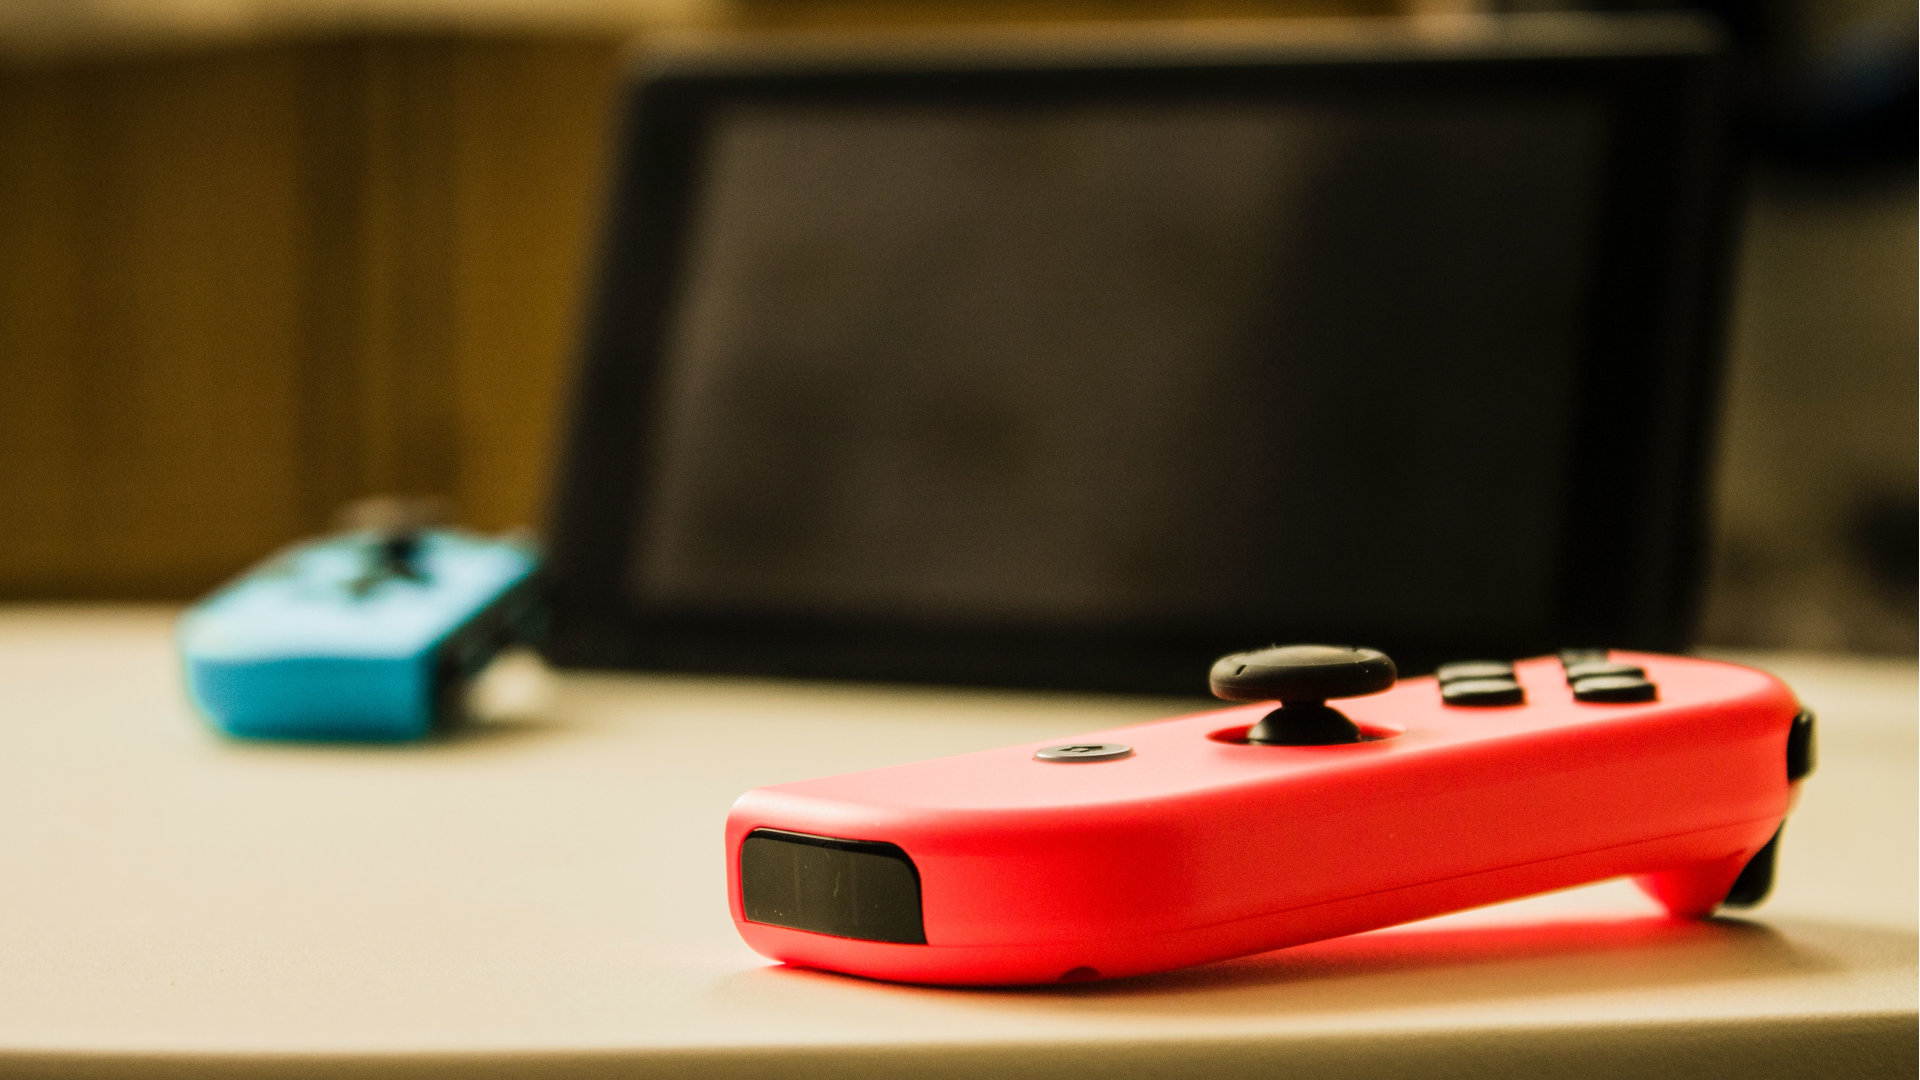 A neon red Joy-Con on a table in the foreground, with a Nintendo Switch screen and a blue Joy-Con on the table in the background, slightly out of focus